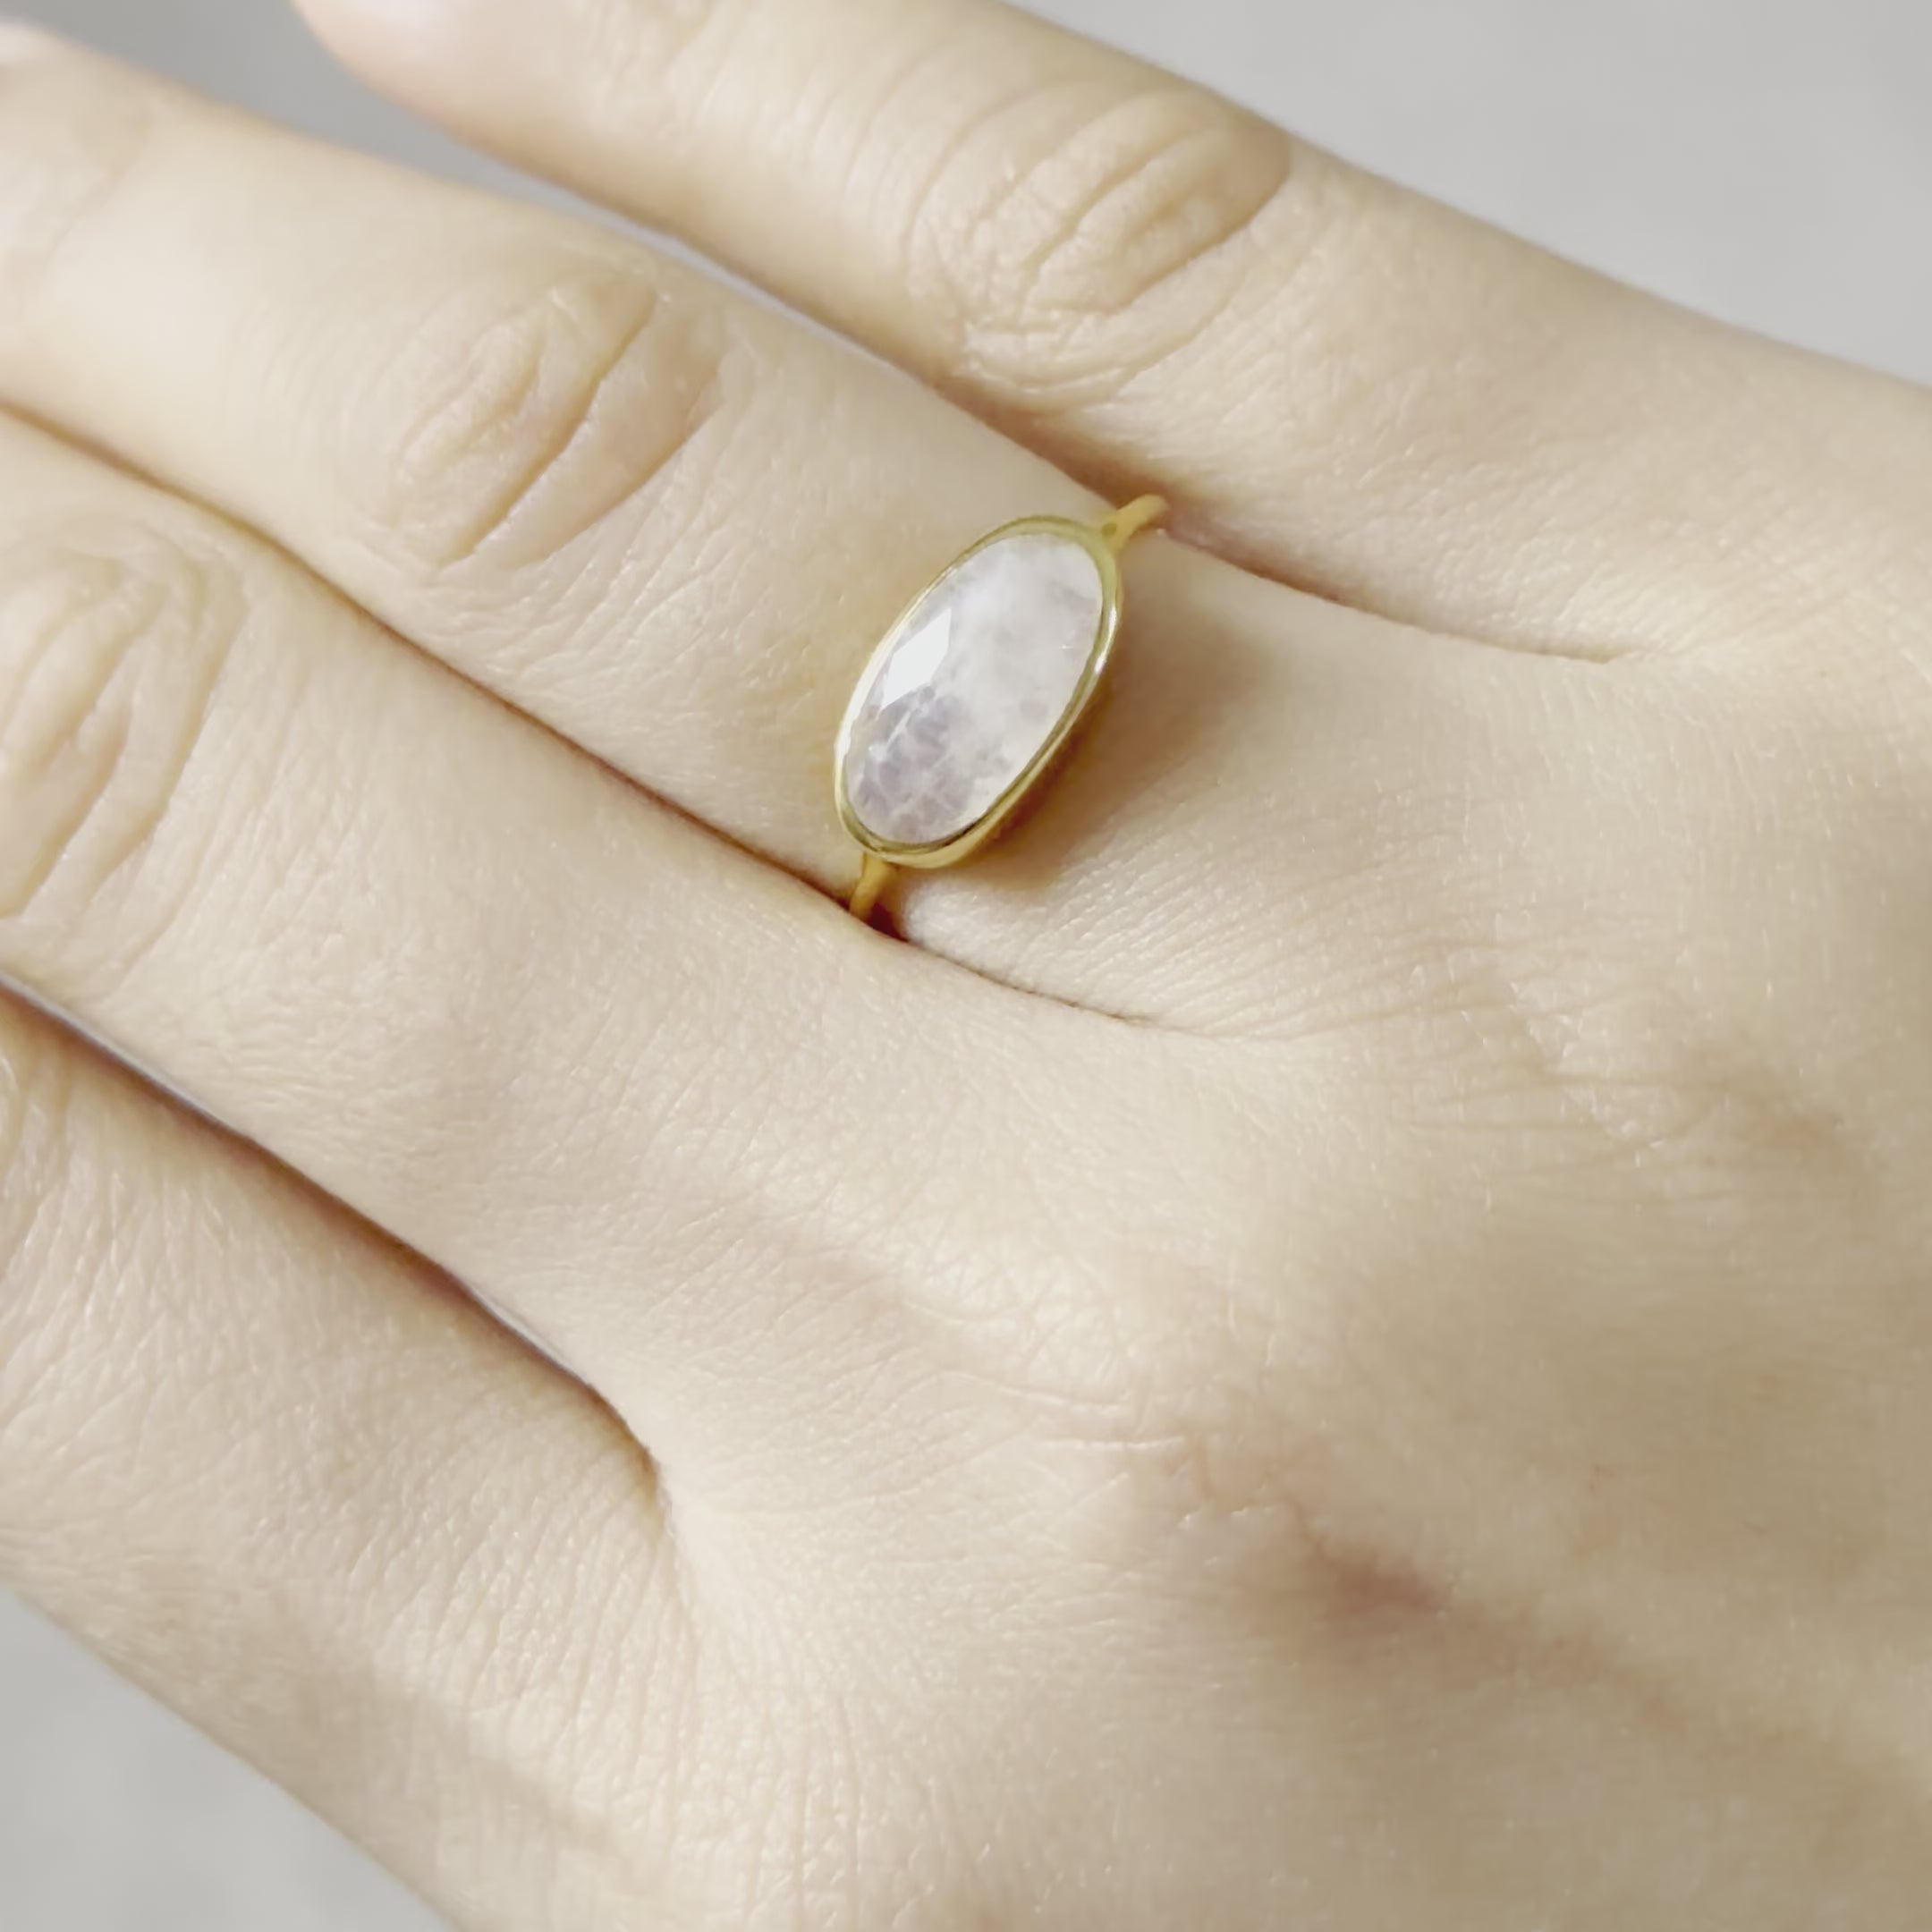 Faceted Oval Cut Natural Gemstone Gold Plated Sterling Silver Fine Band Ring - Moonstone